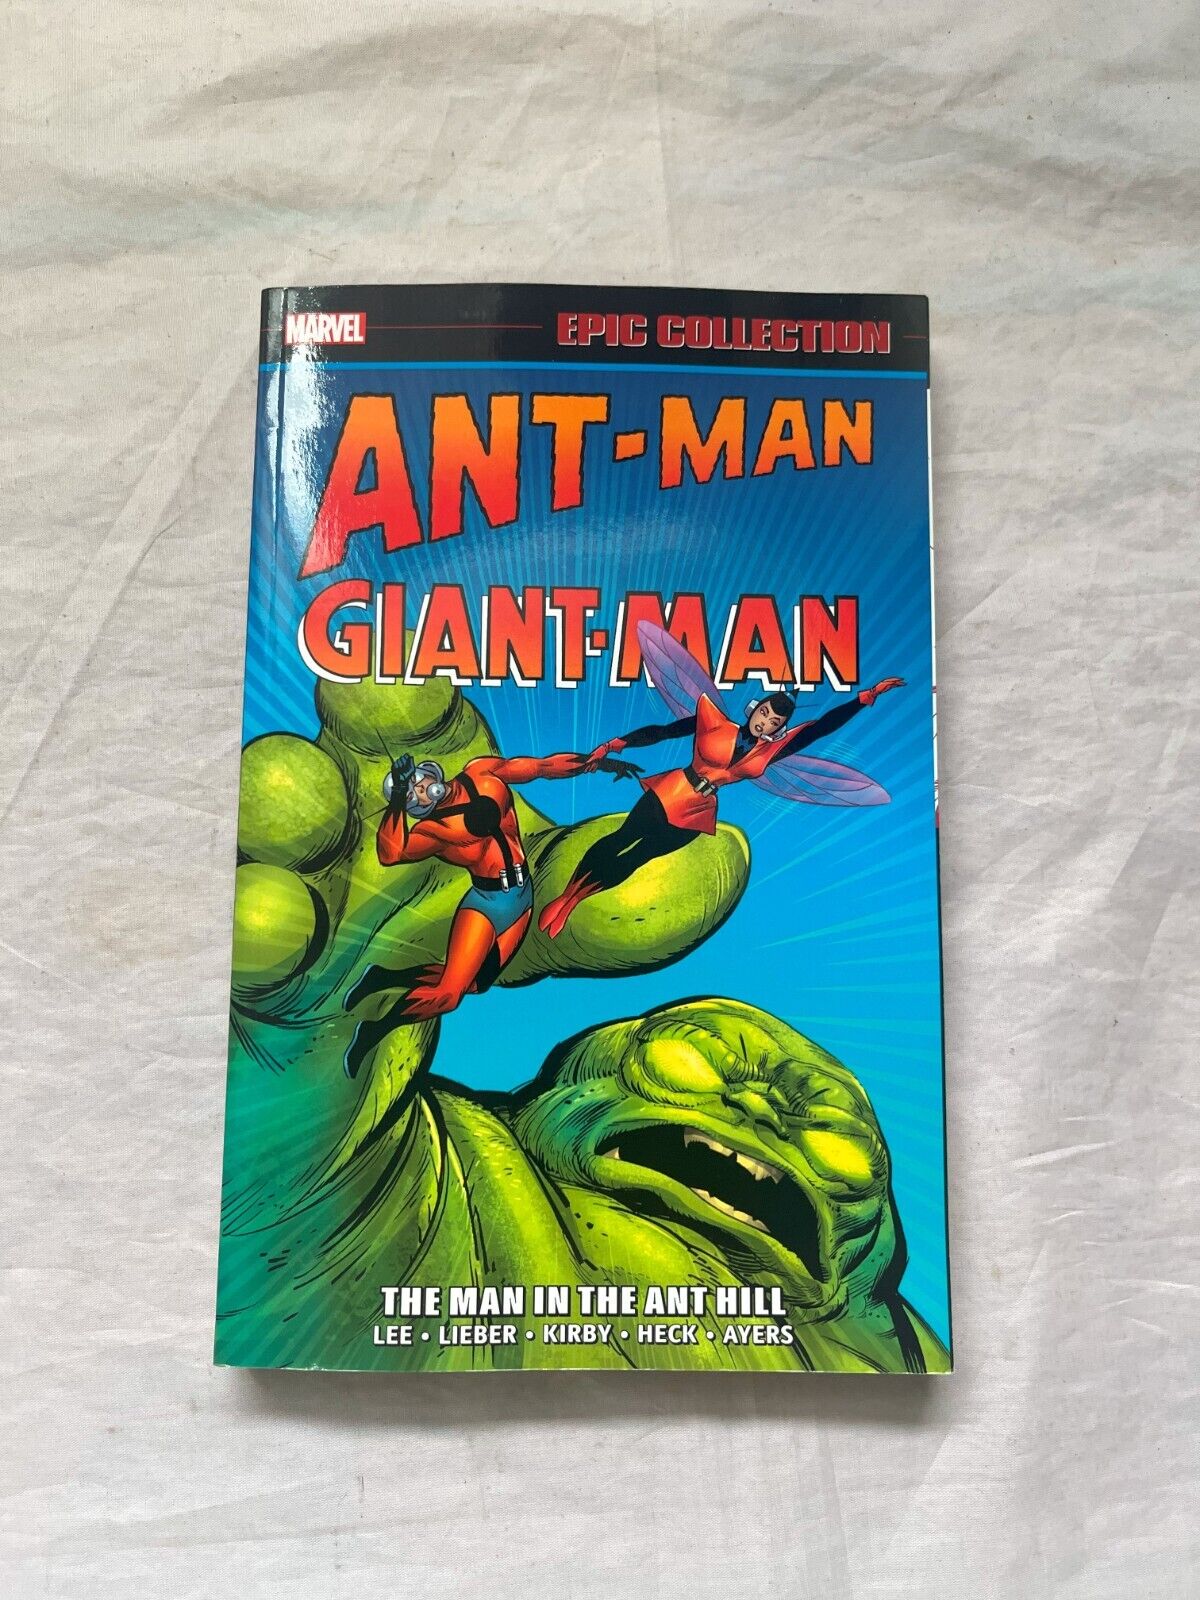 Ant-Man / Giant-Man Marvel Epic Collection Volume 1 Man in the Ant Hill